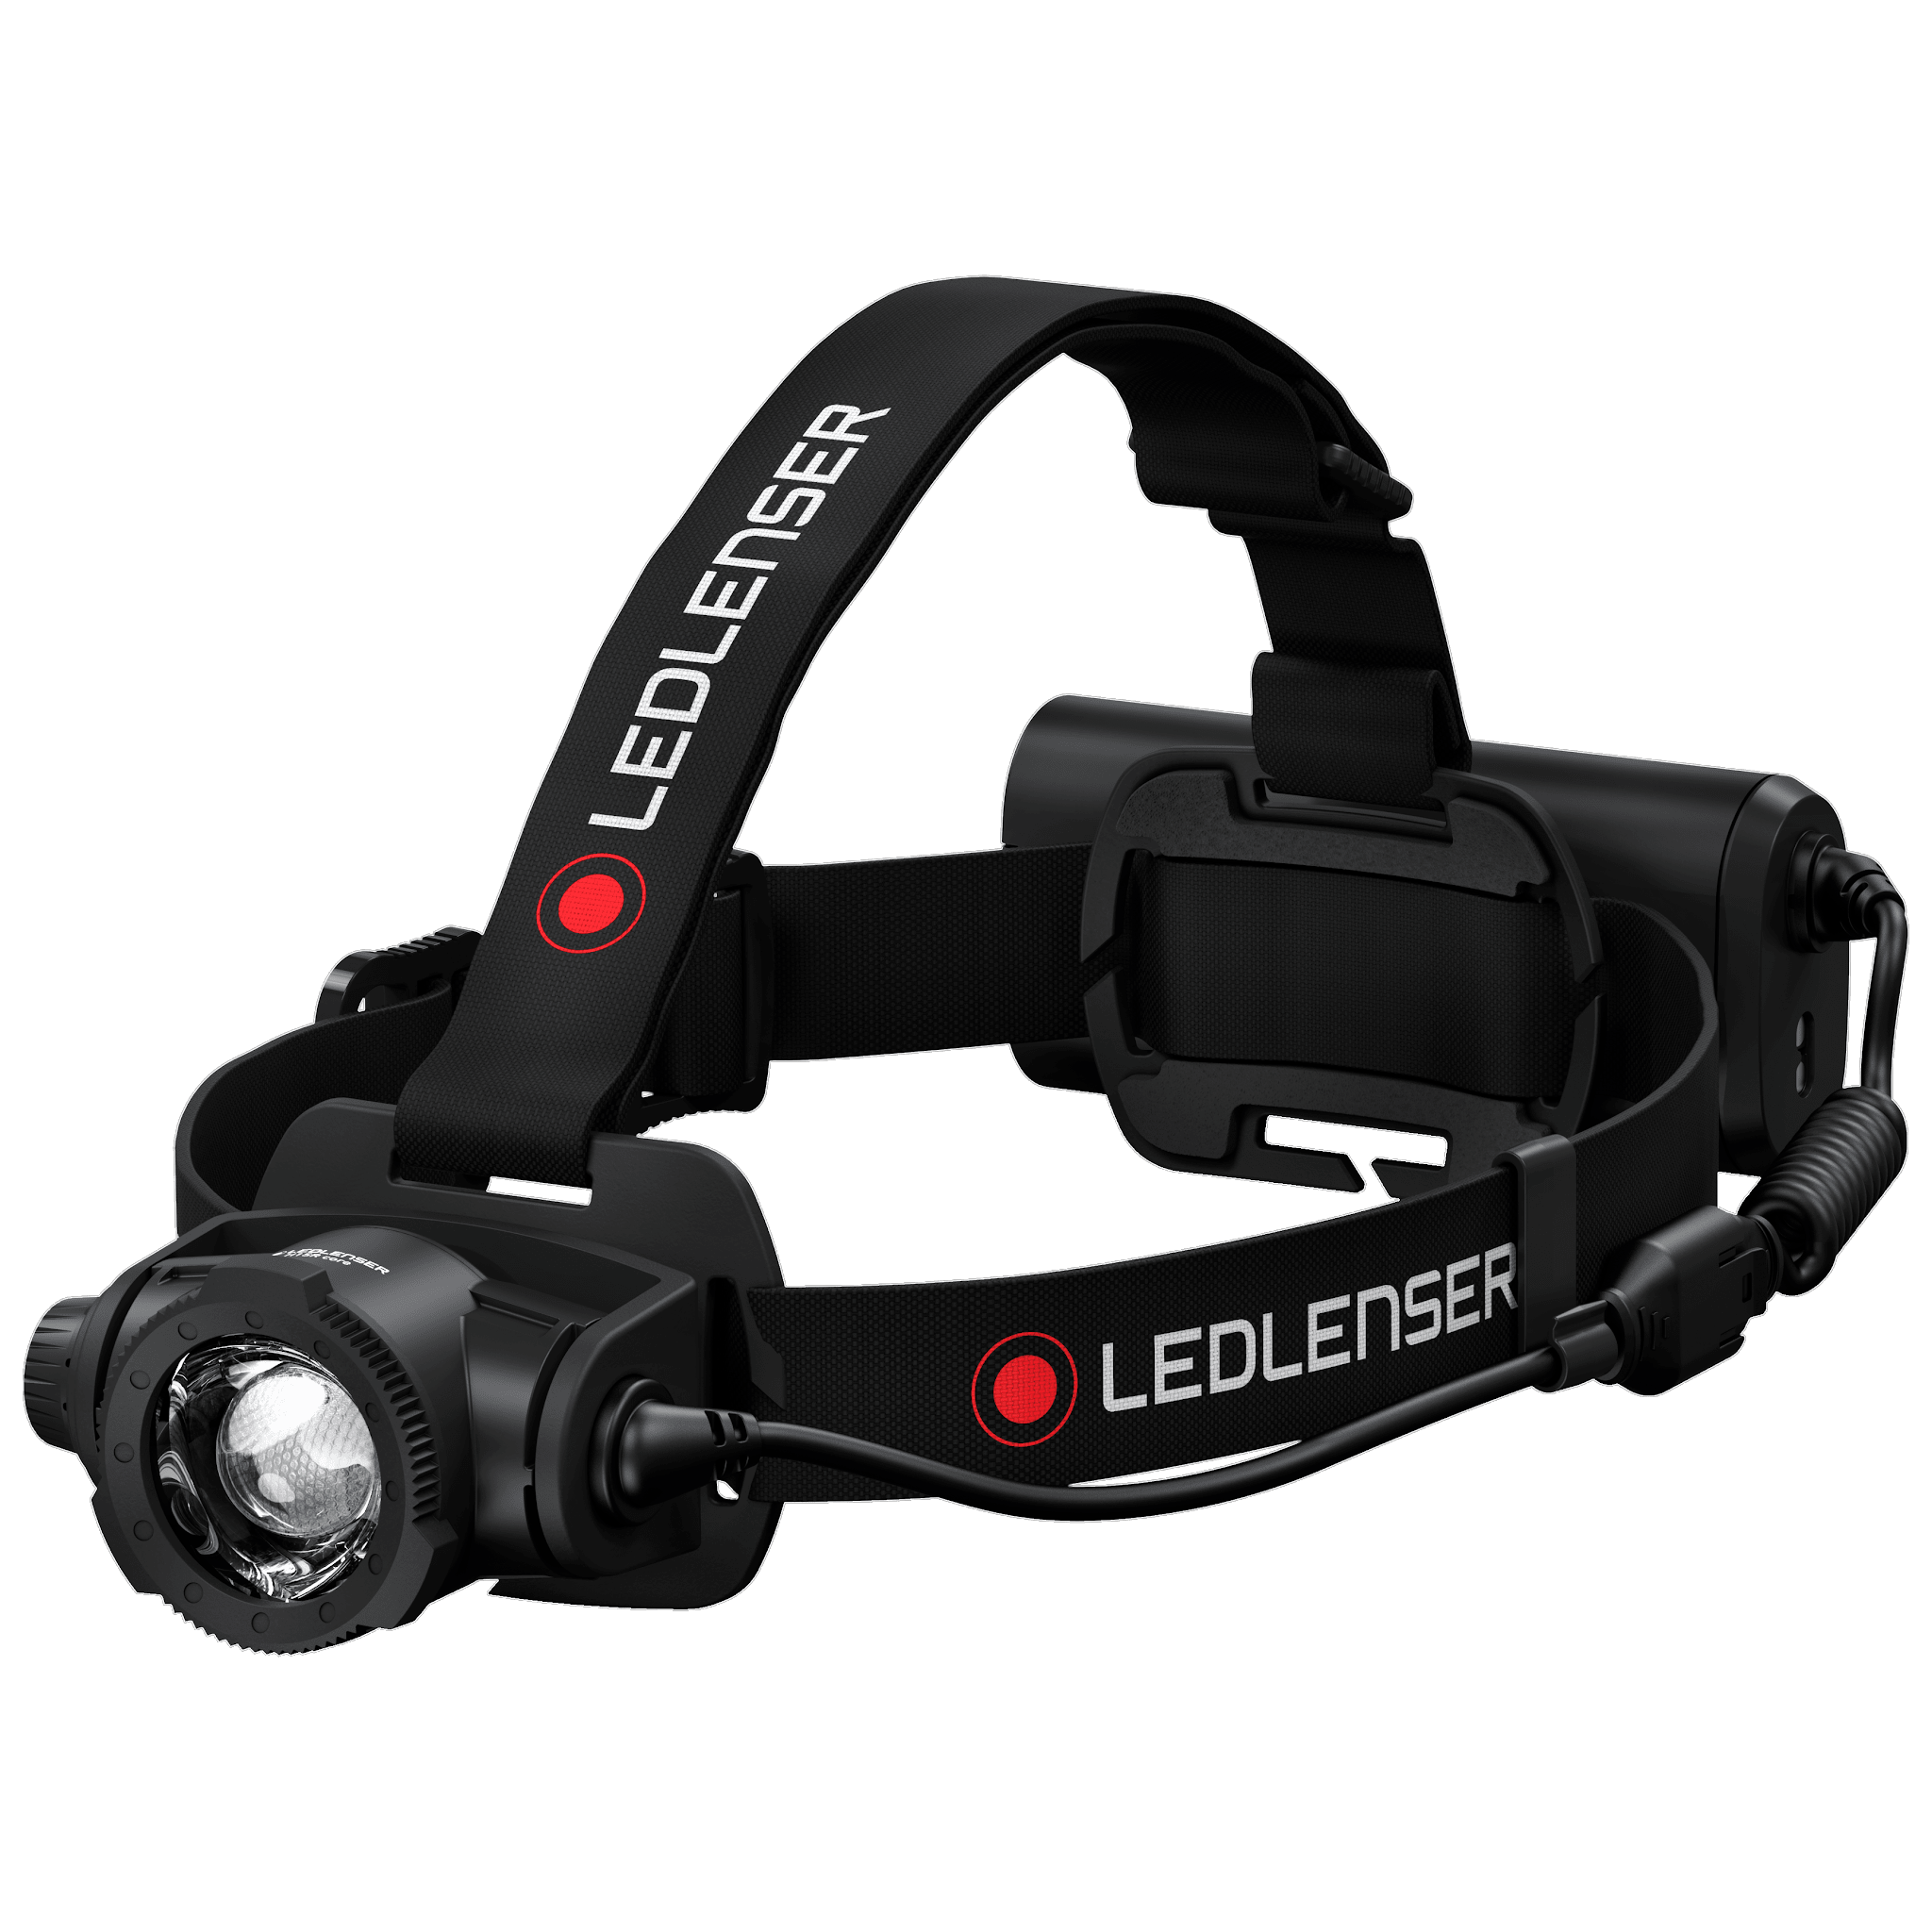 Lampe frontale rechargeable 1600 lumens - HF8R Core Black - LED